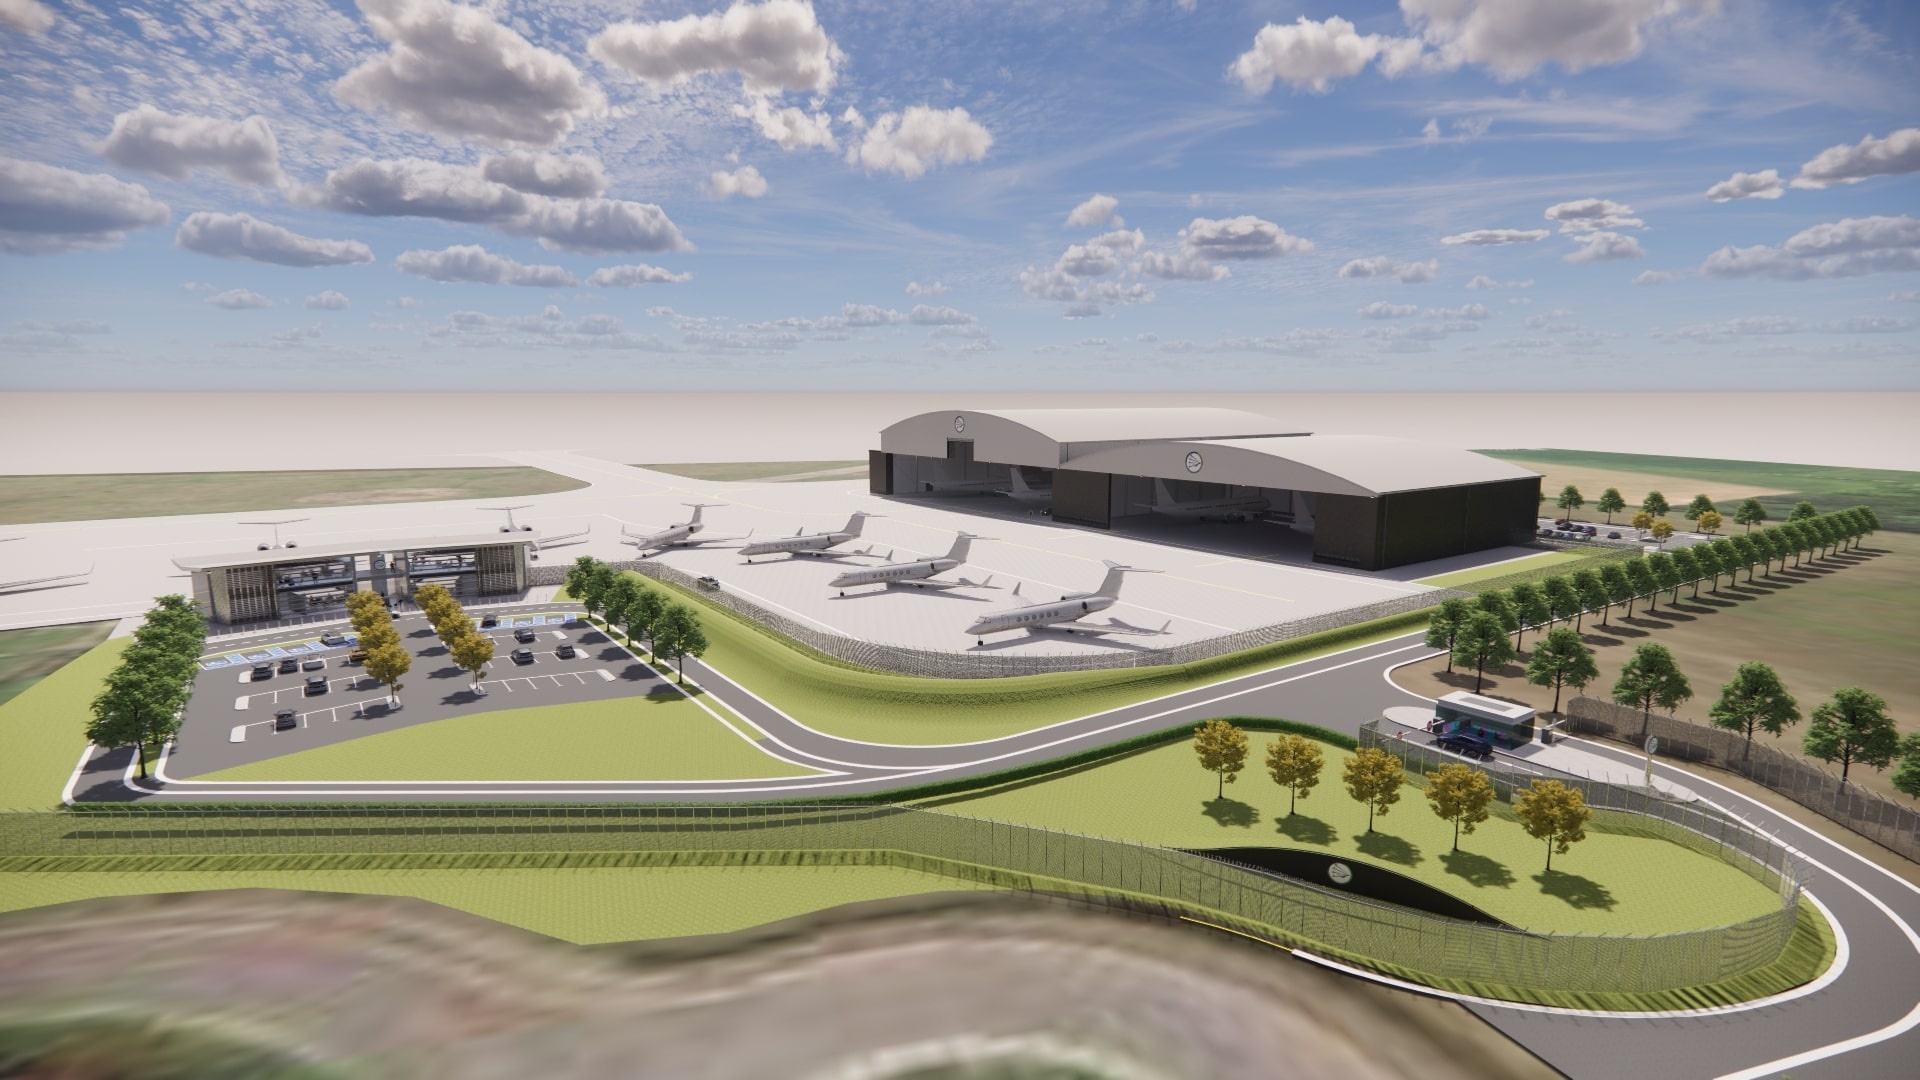 Willis Aviation Services Limited  plans to  invest  £25million at Teesside International Airport  for a  new  aircraft  maintenance  facility  and a  Jet Centre !